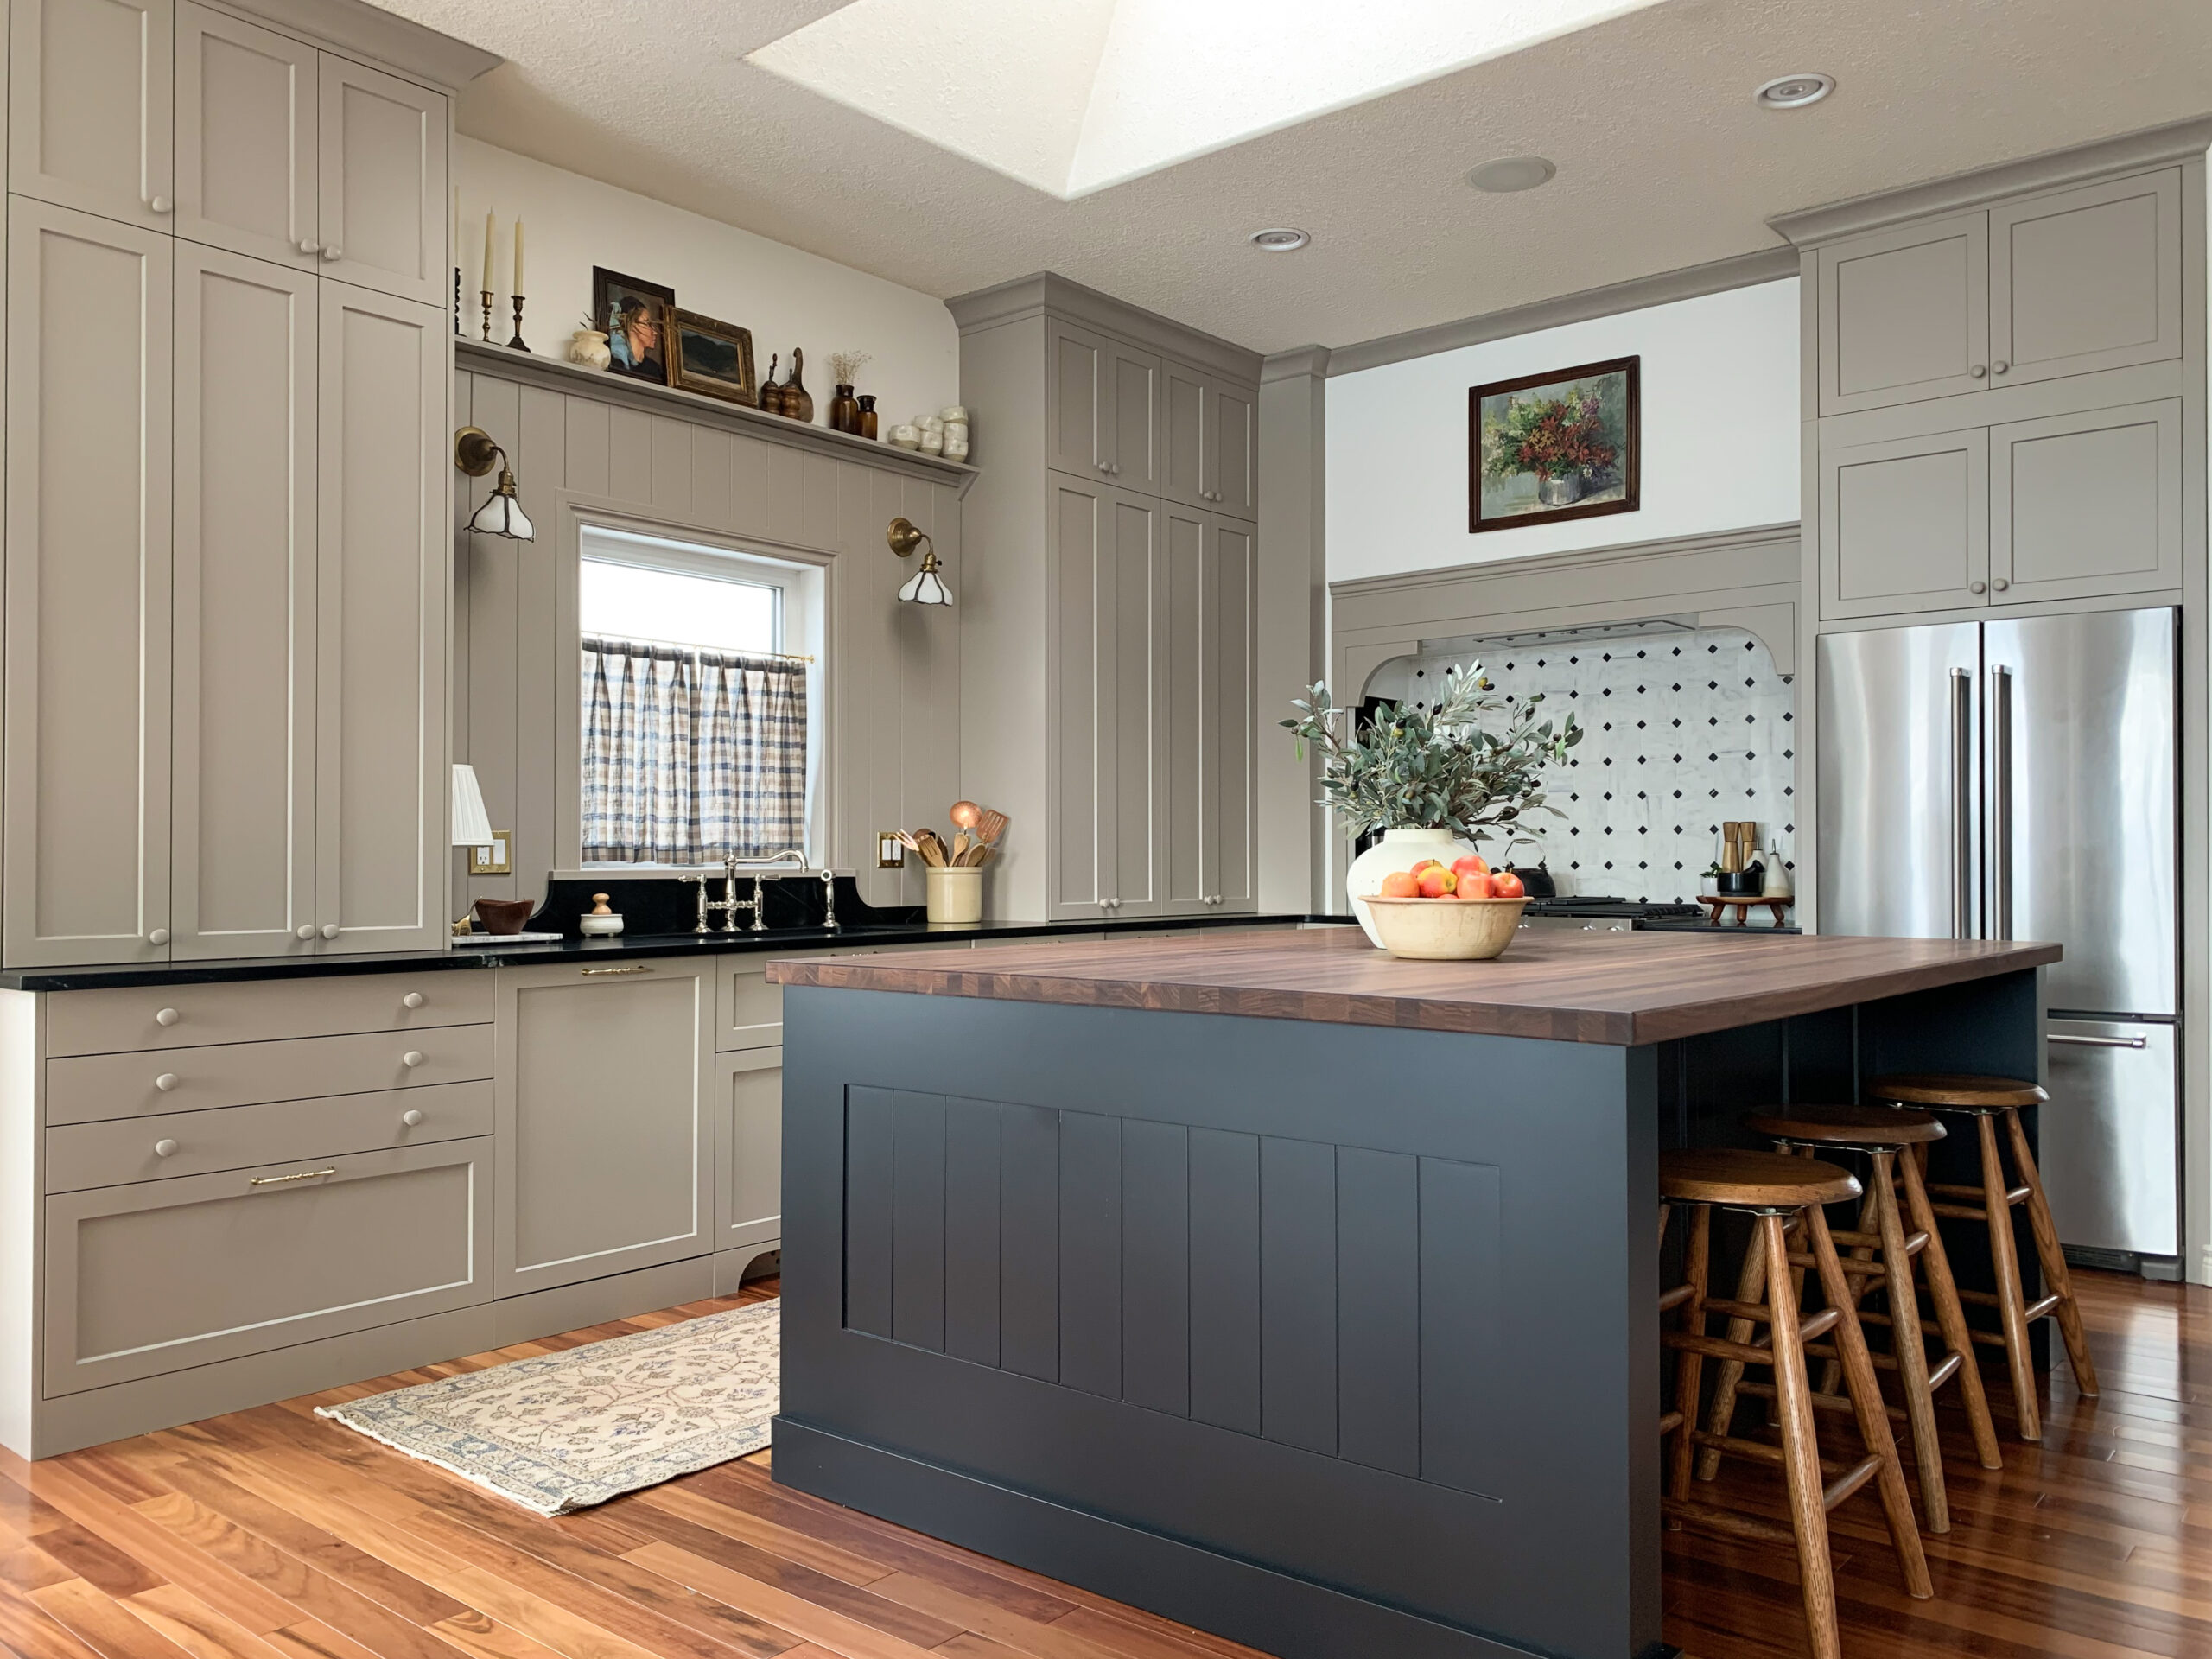 How to Build a Kitchen Island With Stock Cabinets